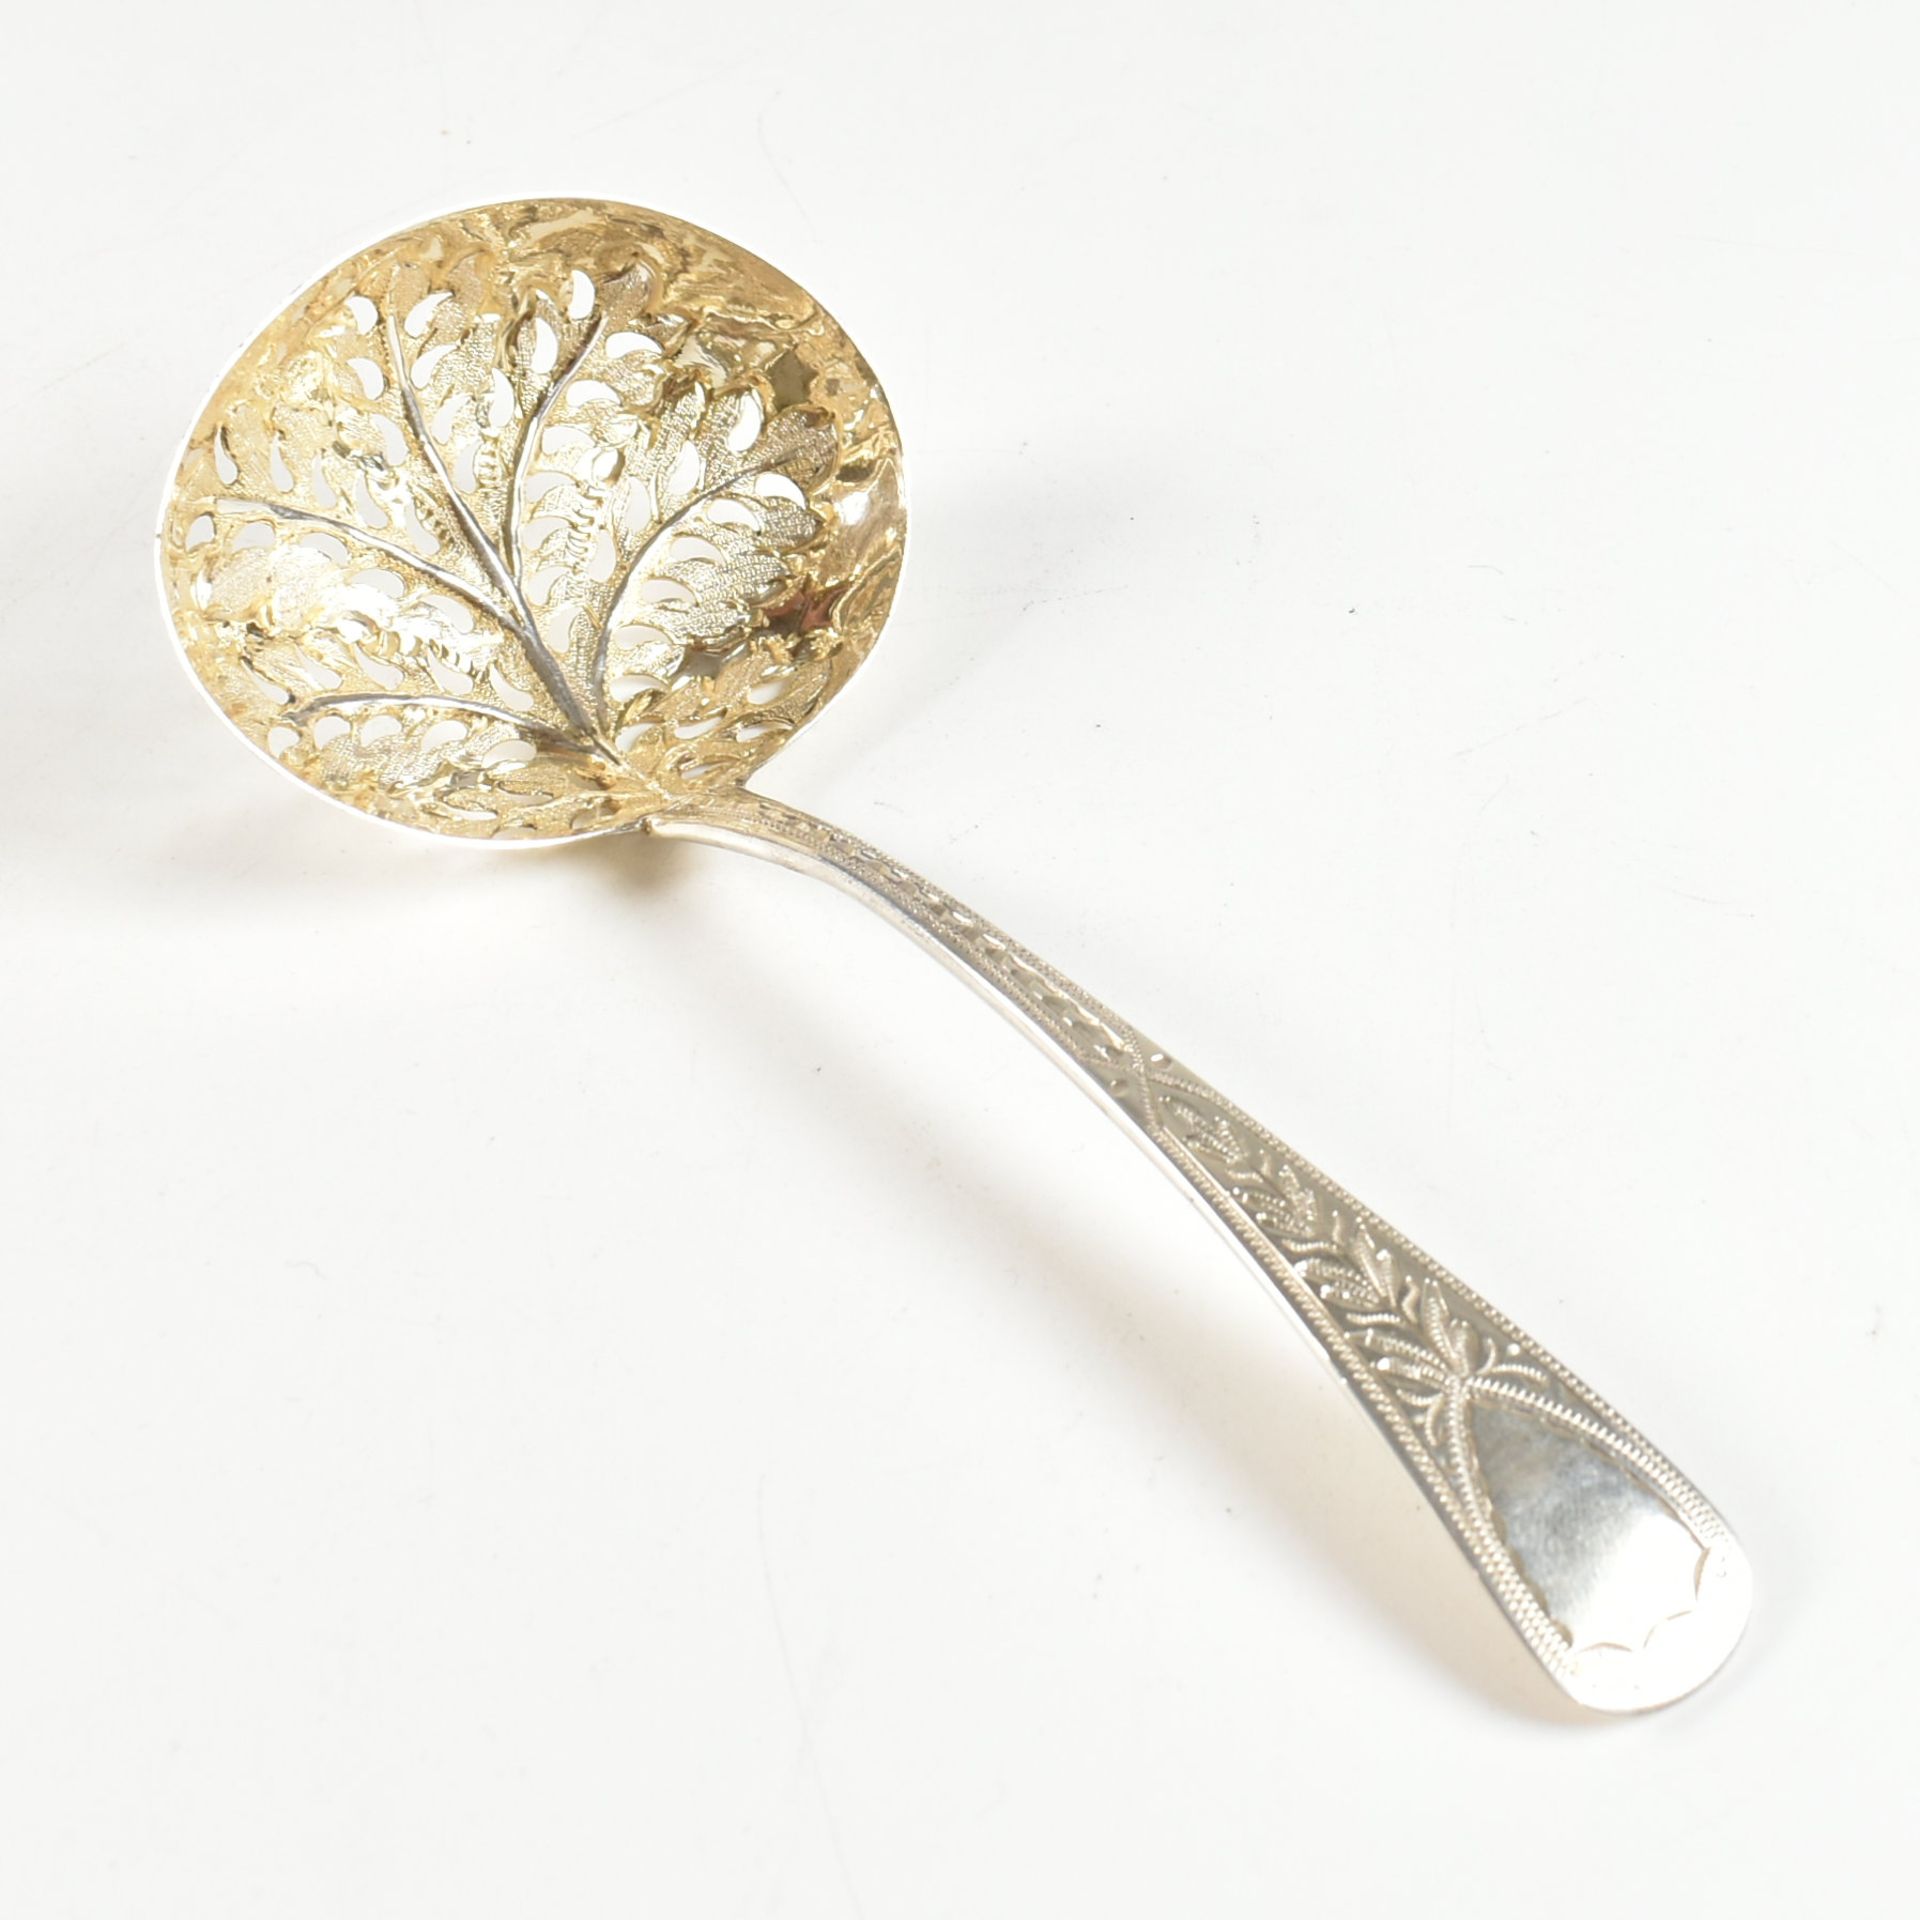 CASED GEORGE II HALLMARKED SILVER SUGAR SIFTER SPOON - Image 5 of 12